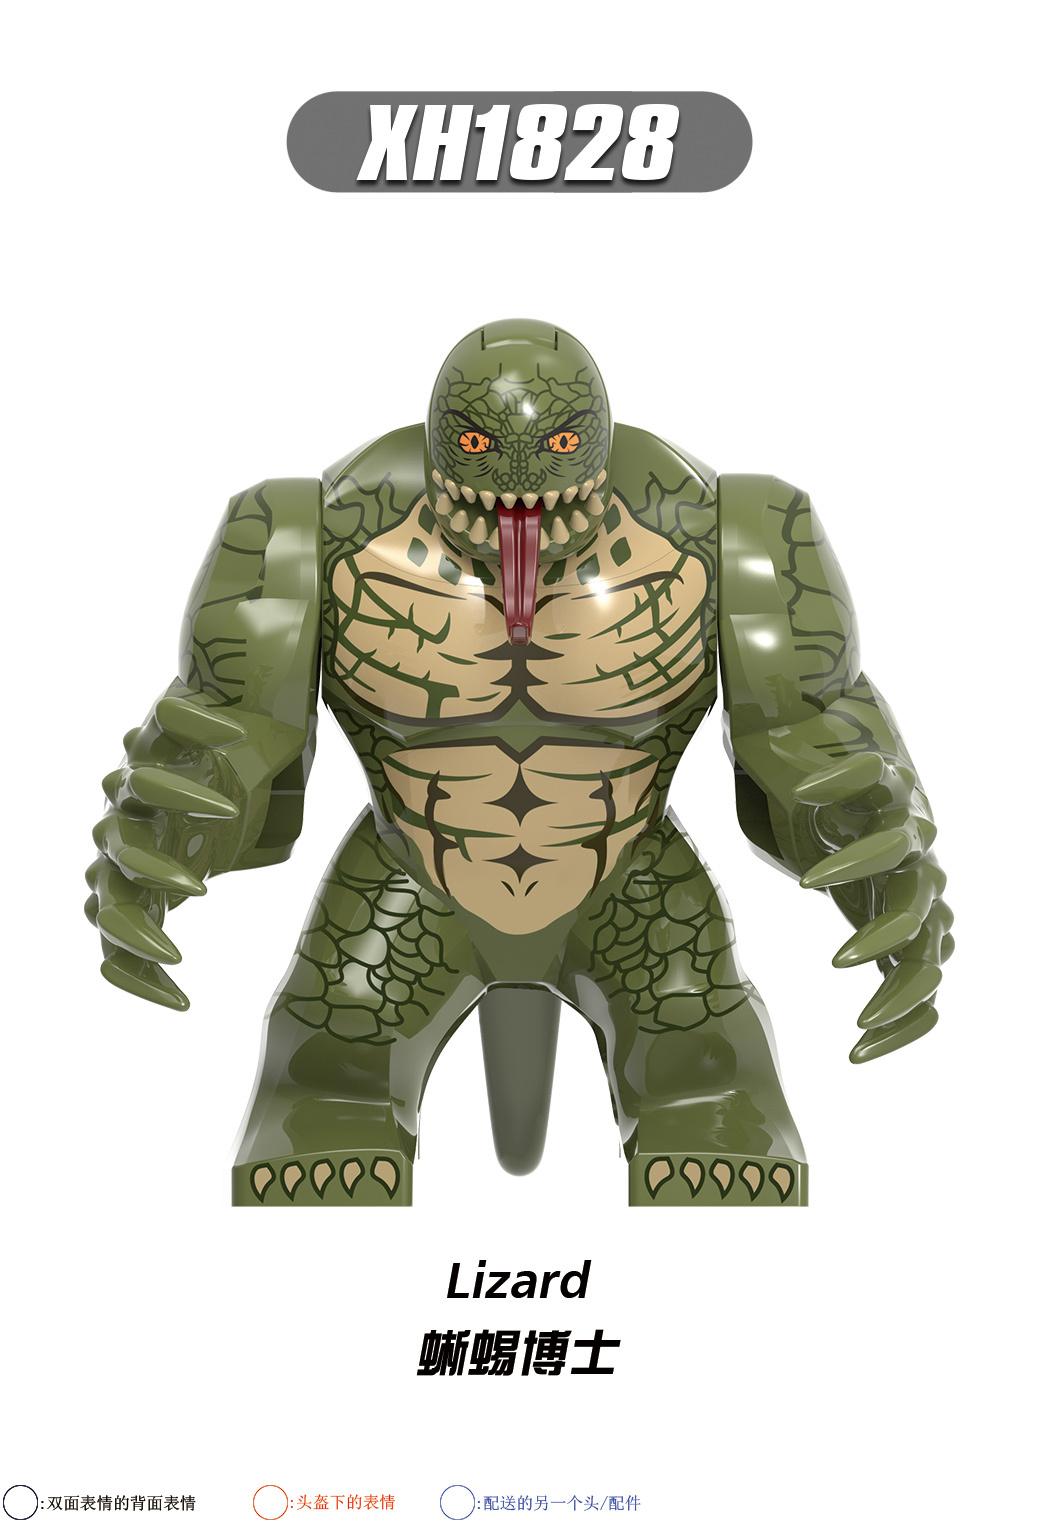 XH1828 XH1829 XH1830 XH1831 XH1832 X0327 Big Model Super Heroes Lizard Venom Carnage Movie Series Building Blocks Action Figures Educational Toys For Kids Gifts